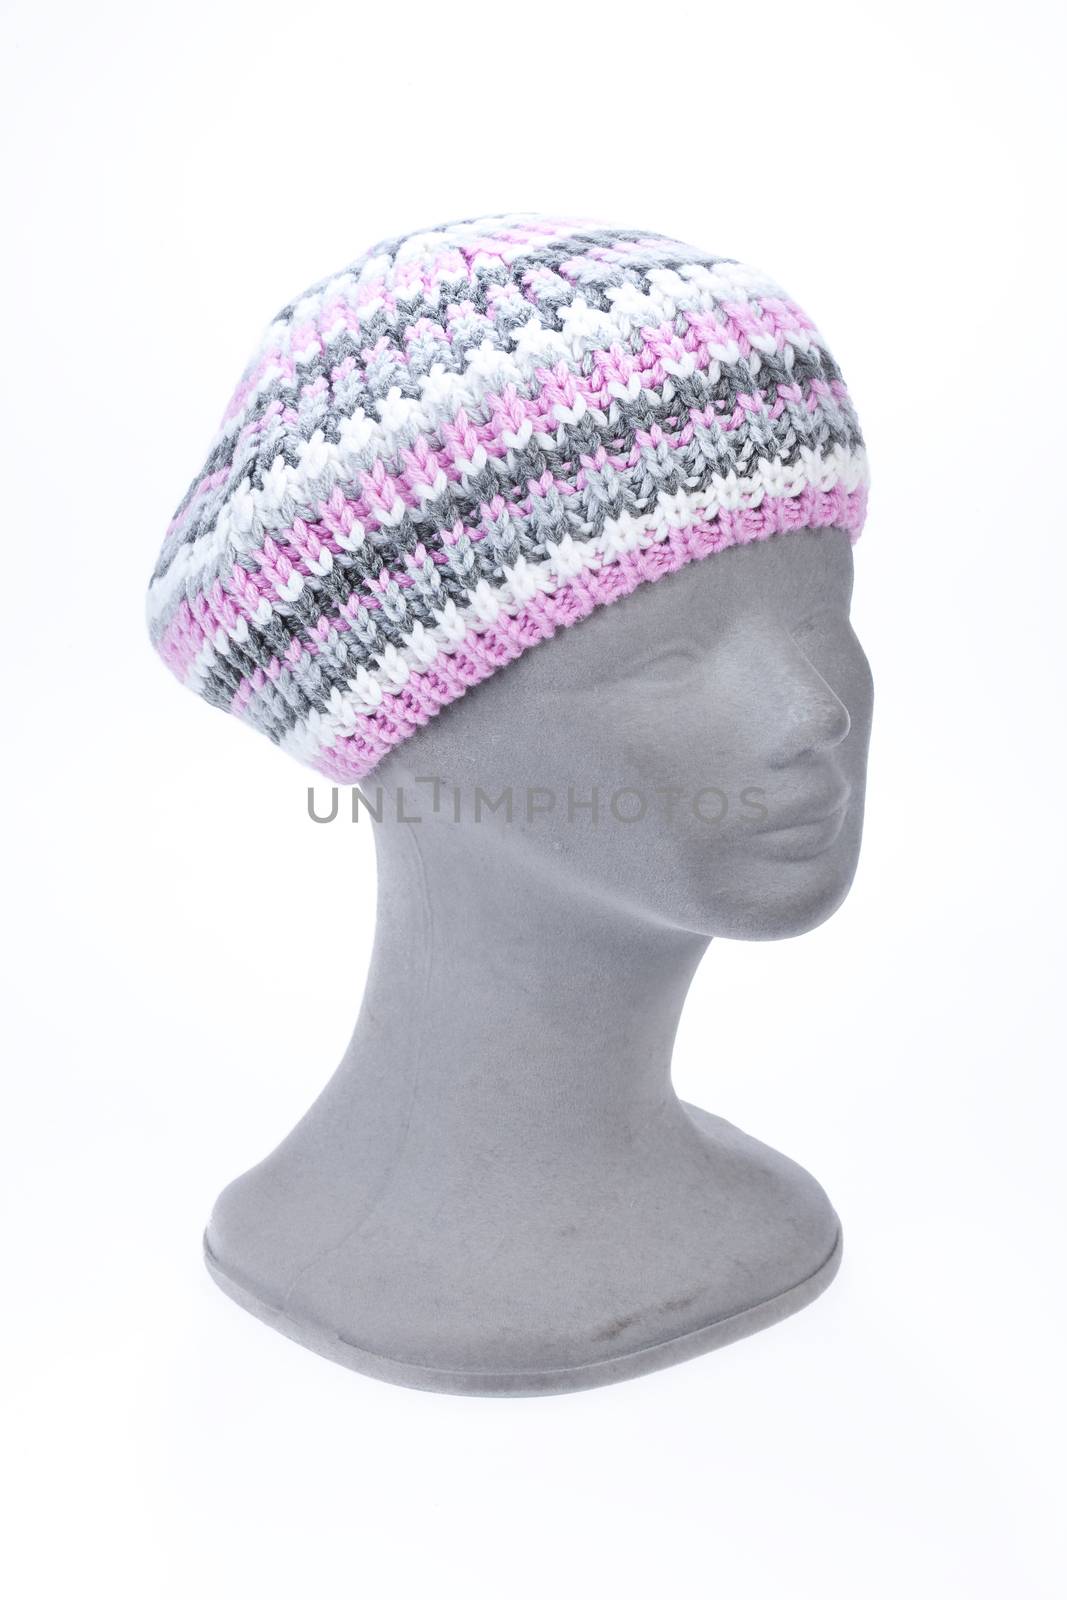 Knitted Hat by Fotoskat